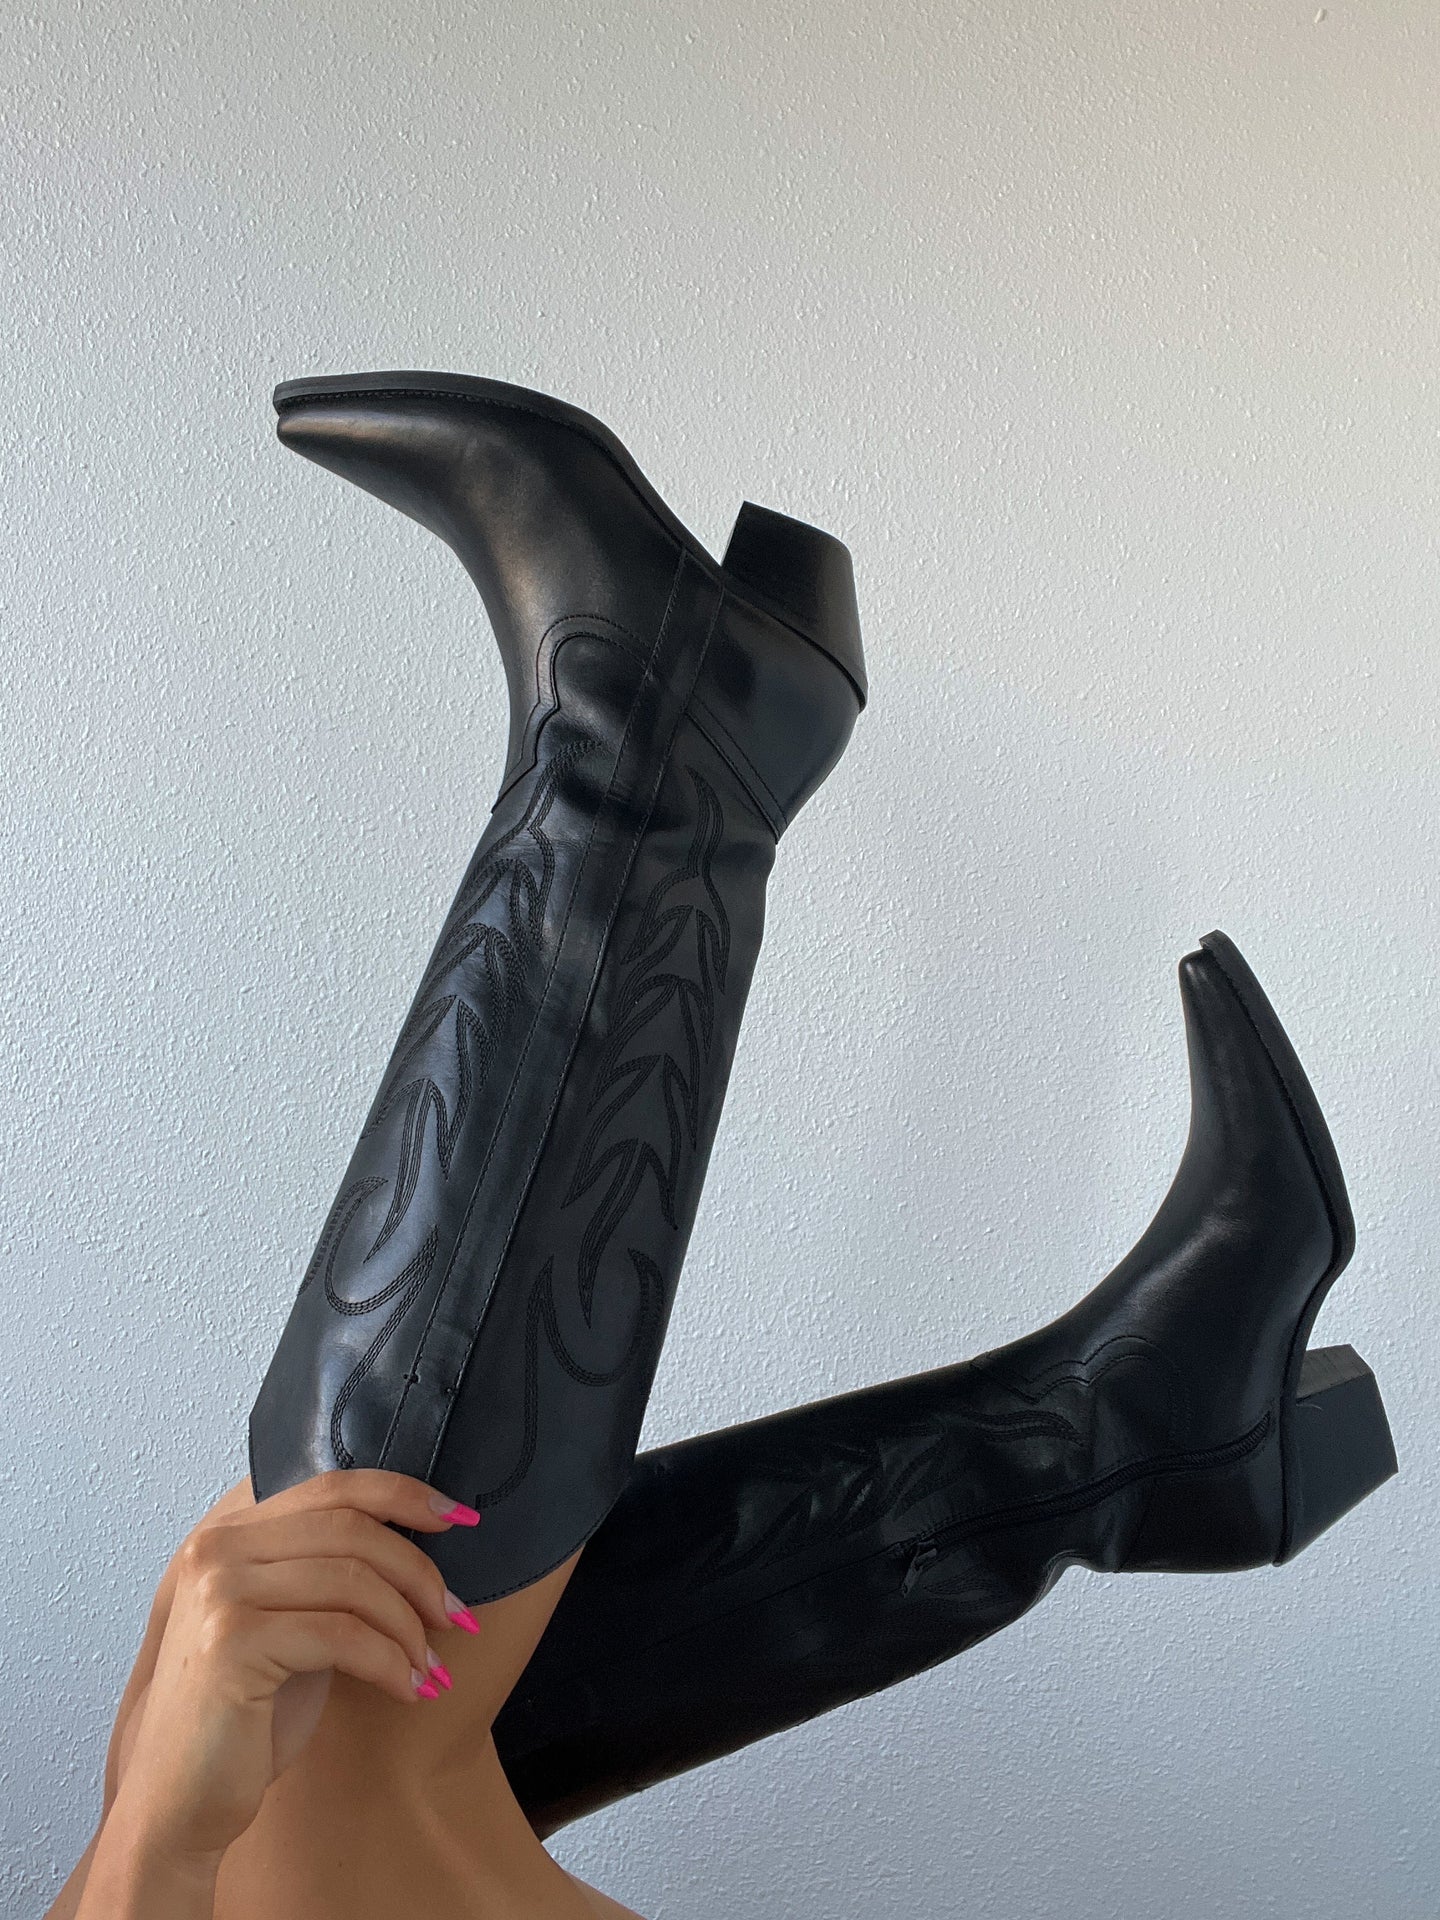 Tall Black Cowgirl Boots